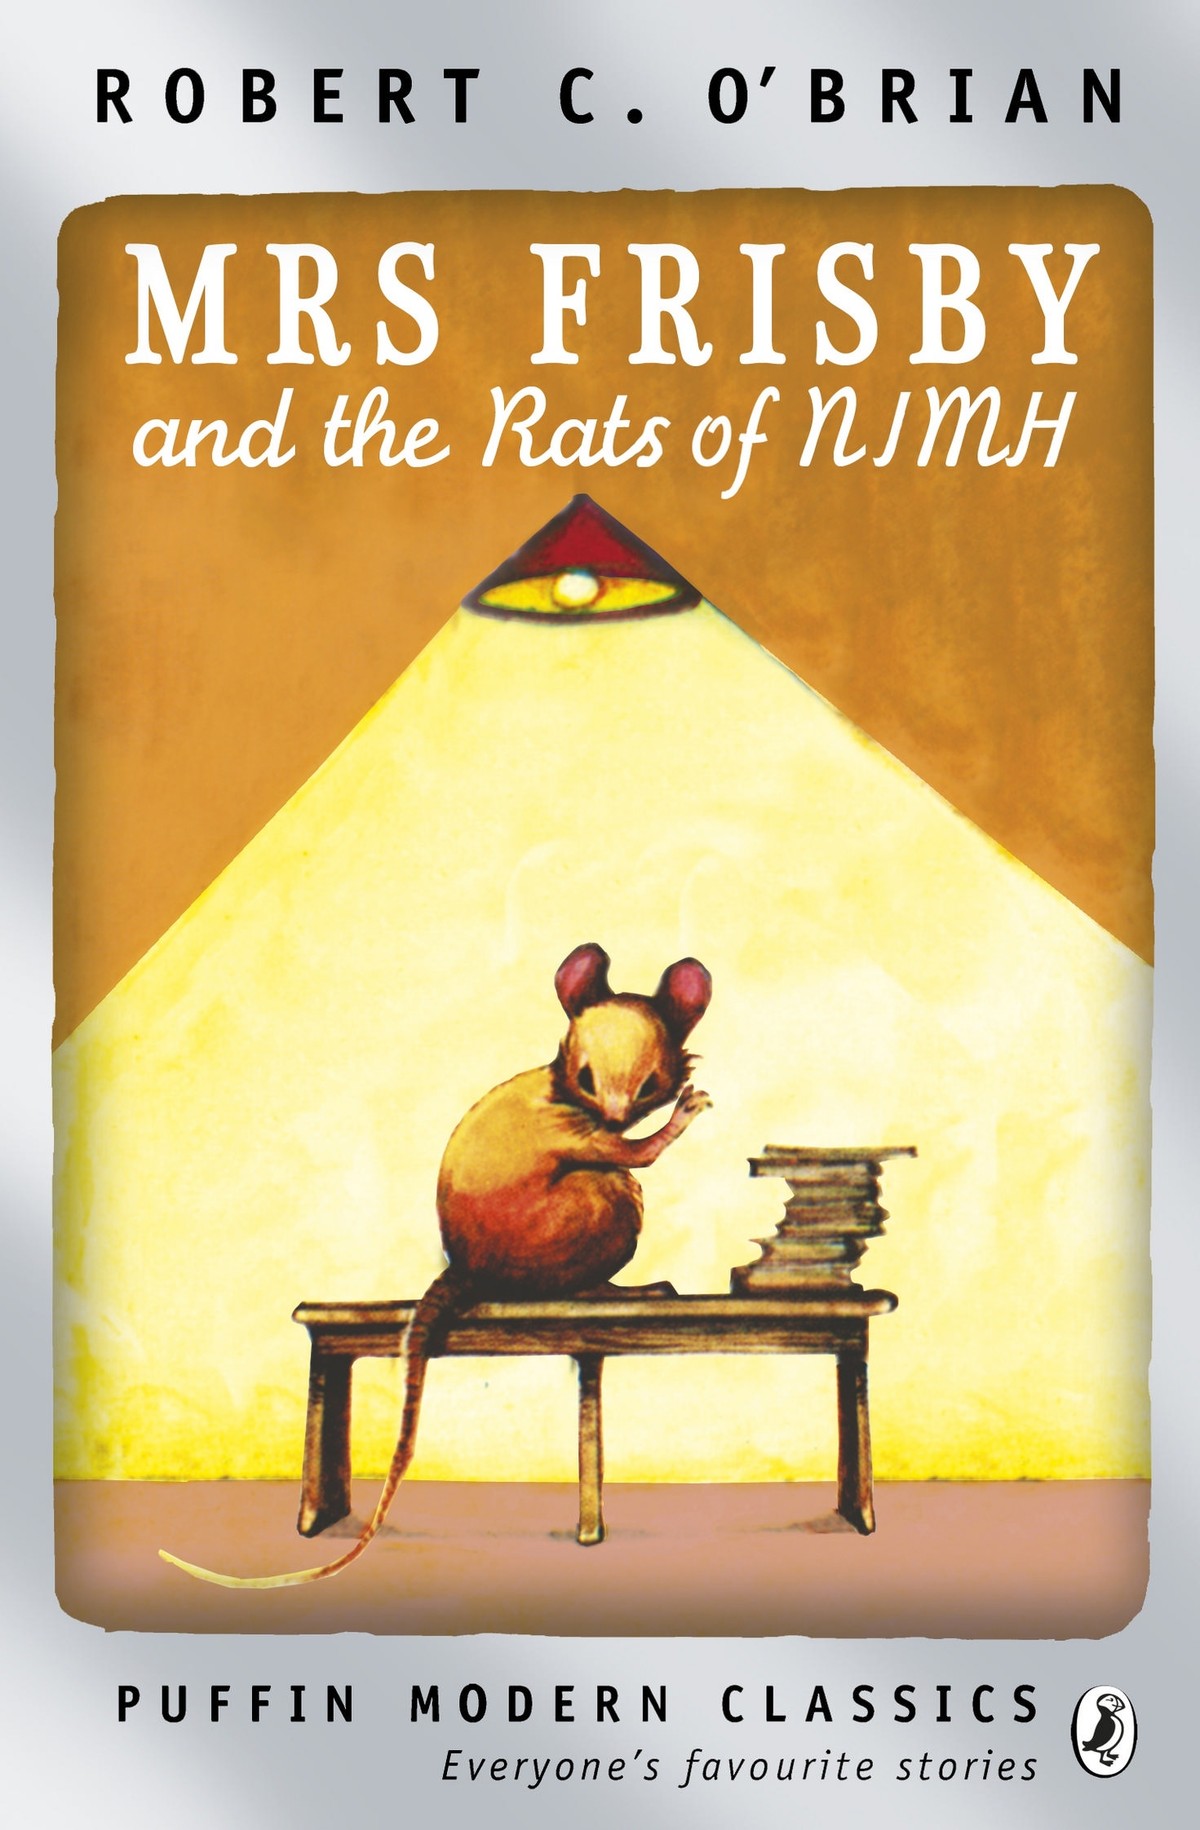 MRS. FRISBY AND THE RATS OF NIMH May Be Headed Back To The Big Screen!!